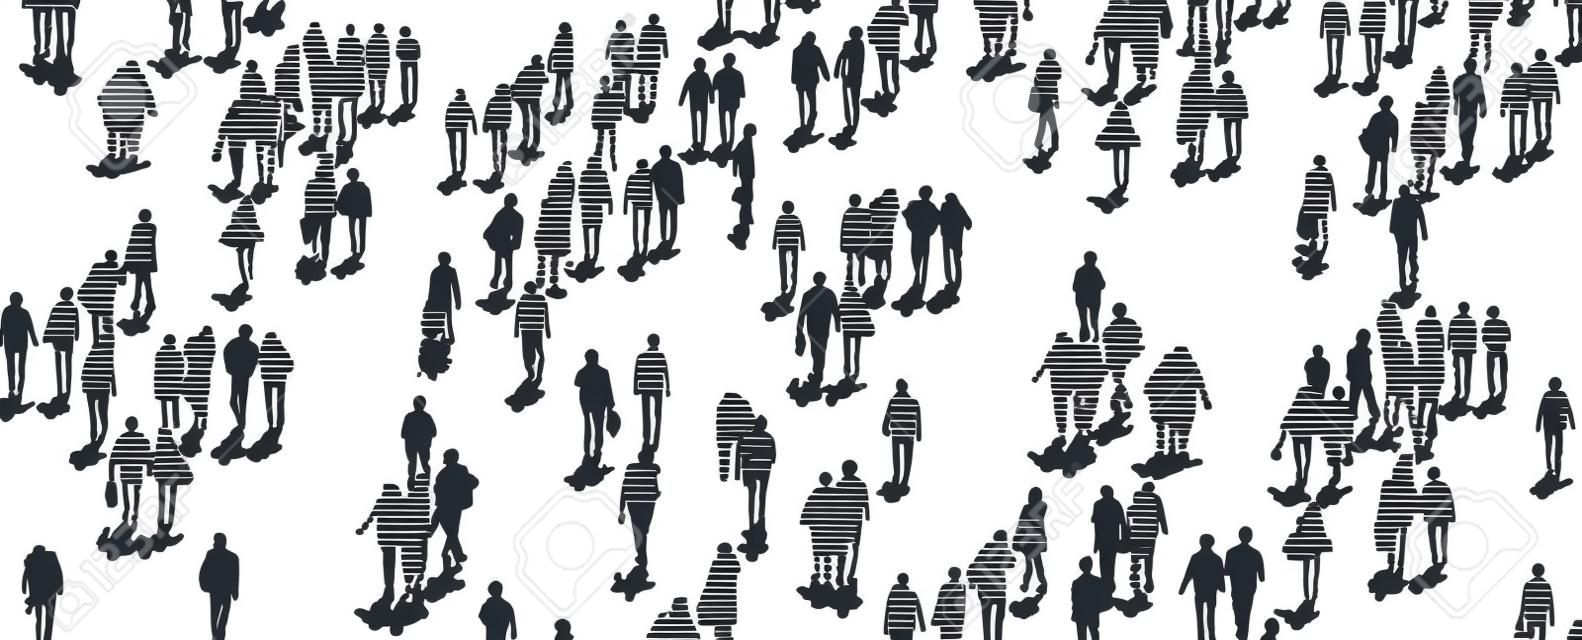 Vector illustration of crowd of people walking from high angle view perspective